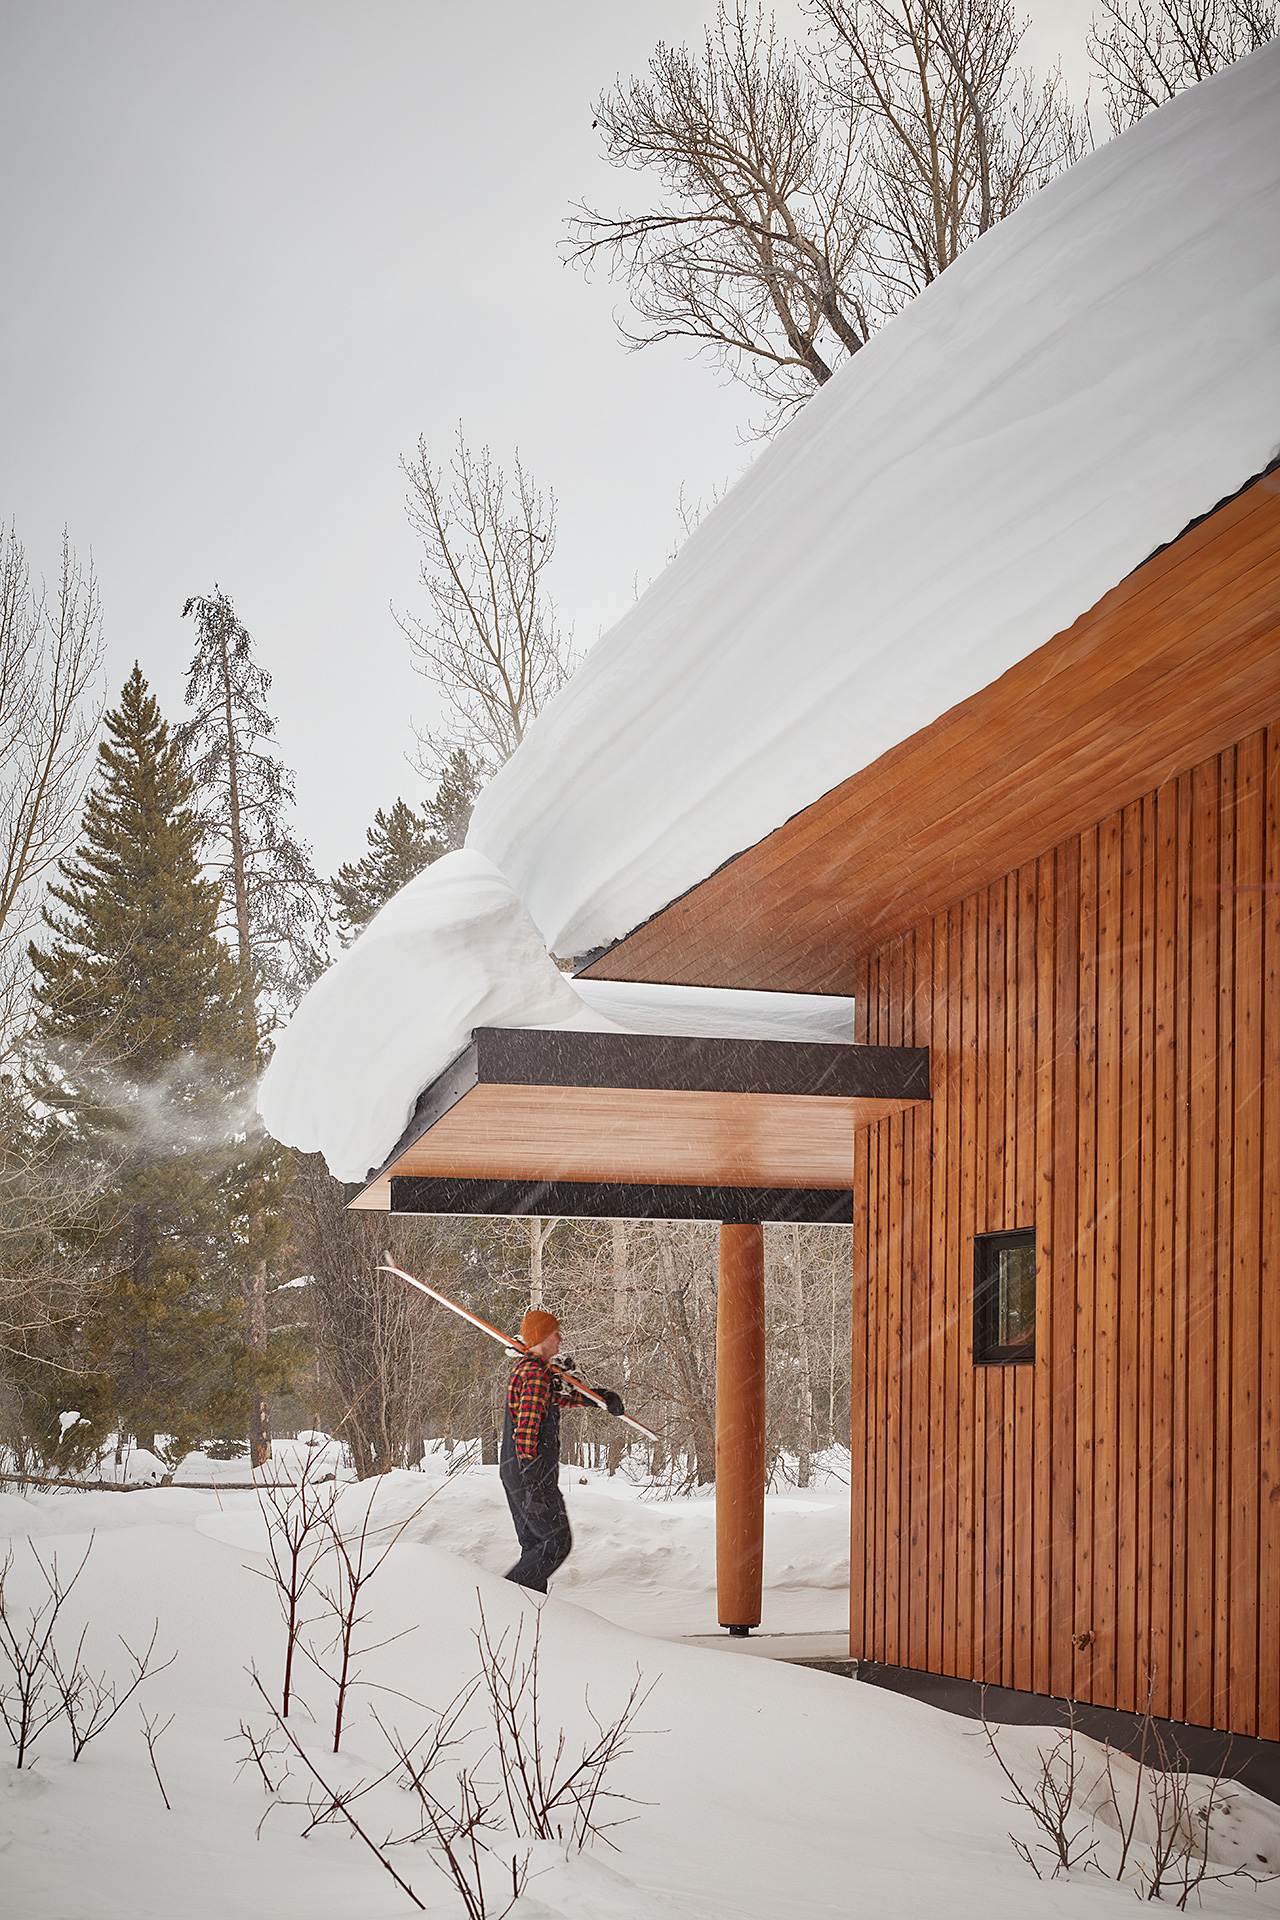 guest house in the winter with man carrying ski's outside